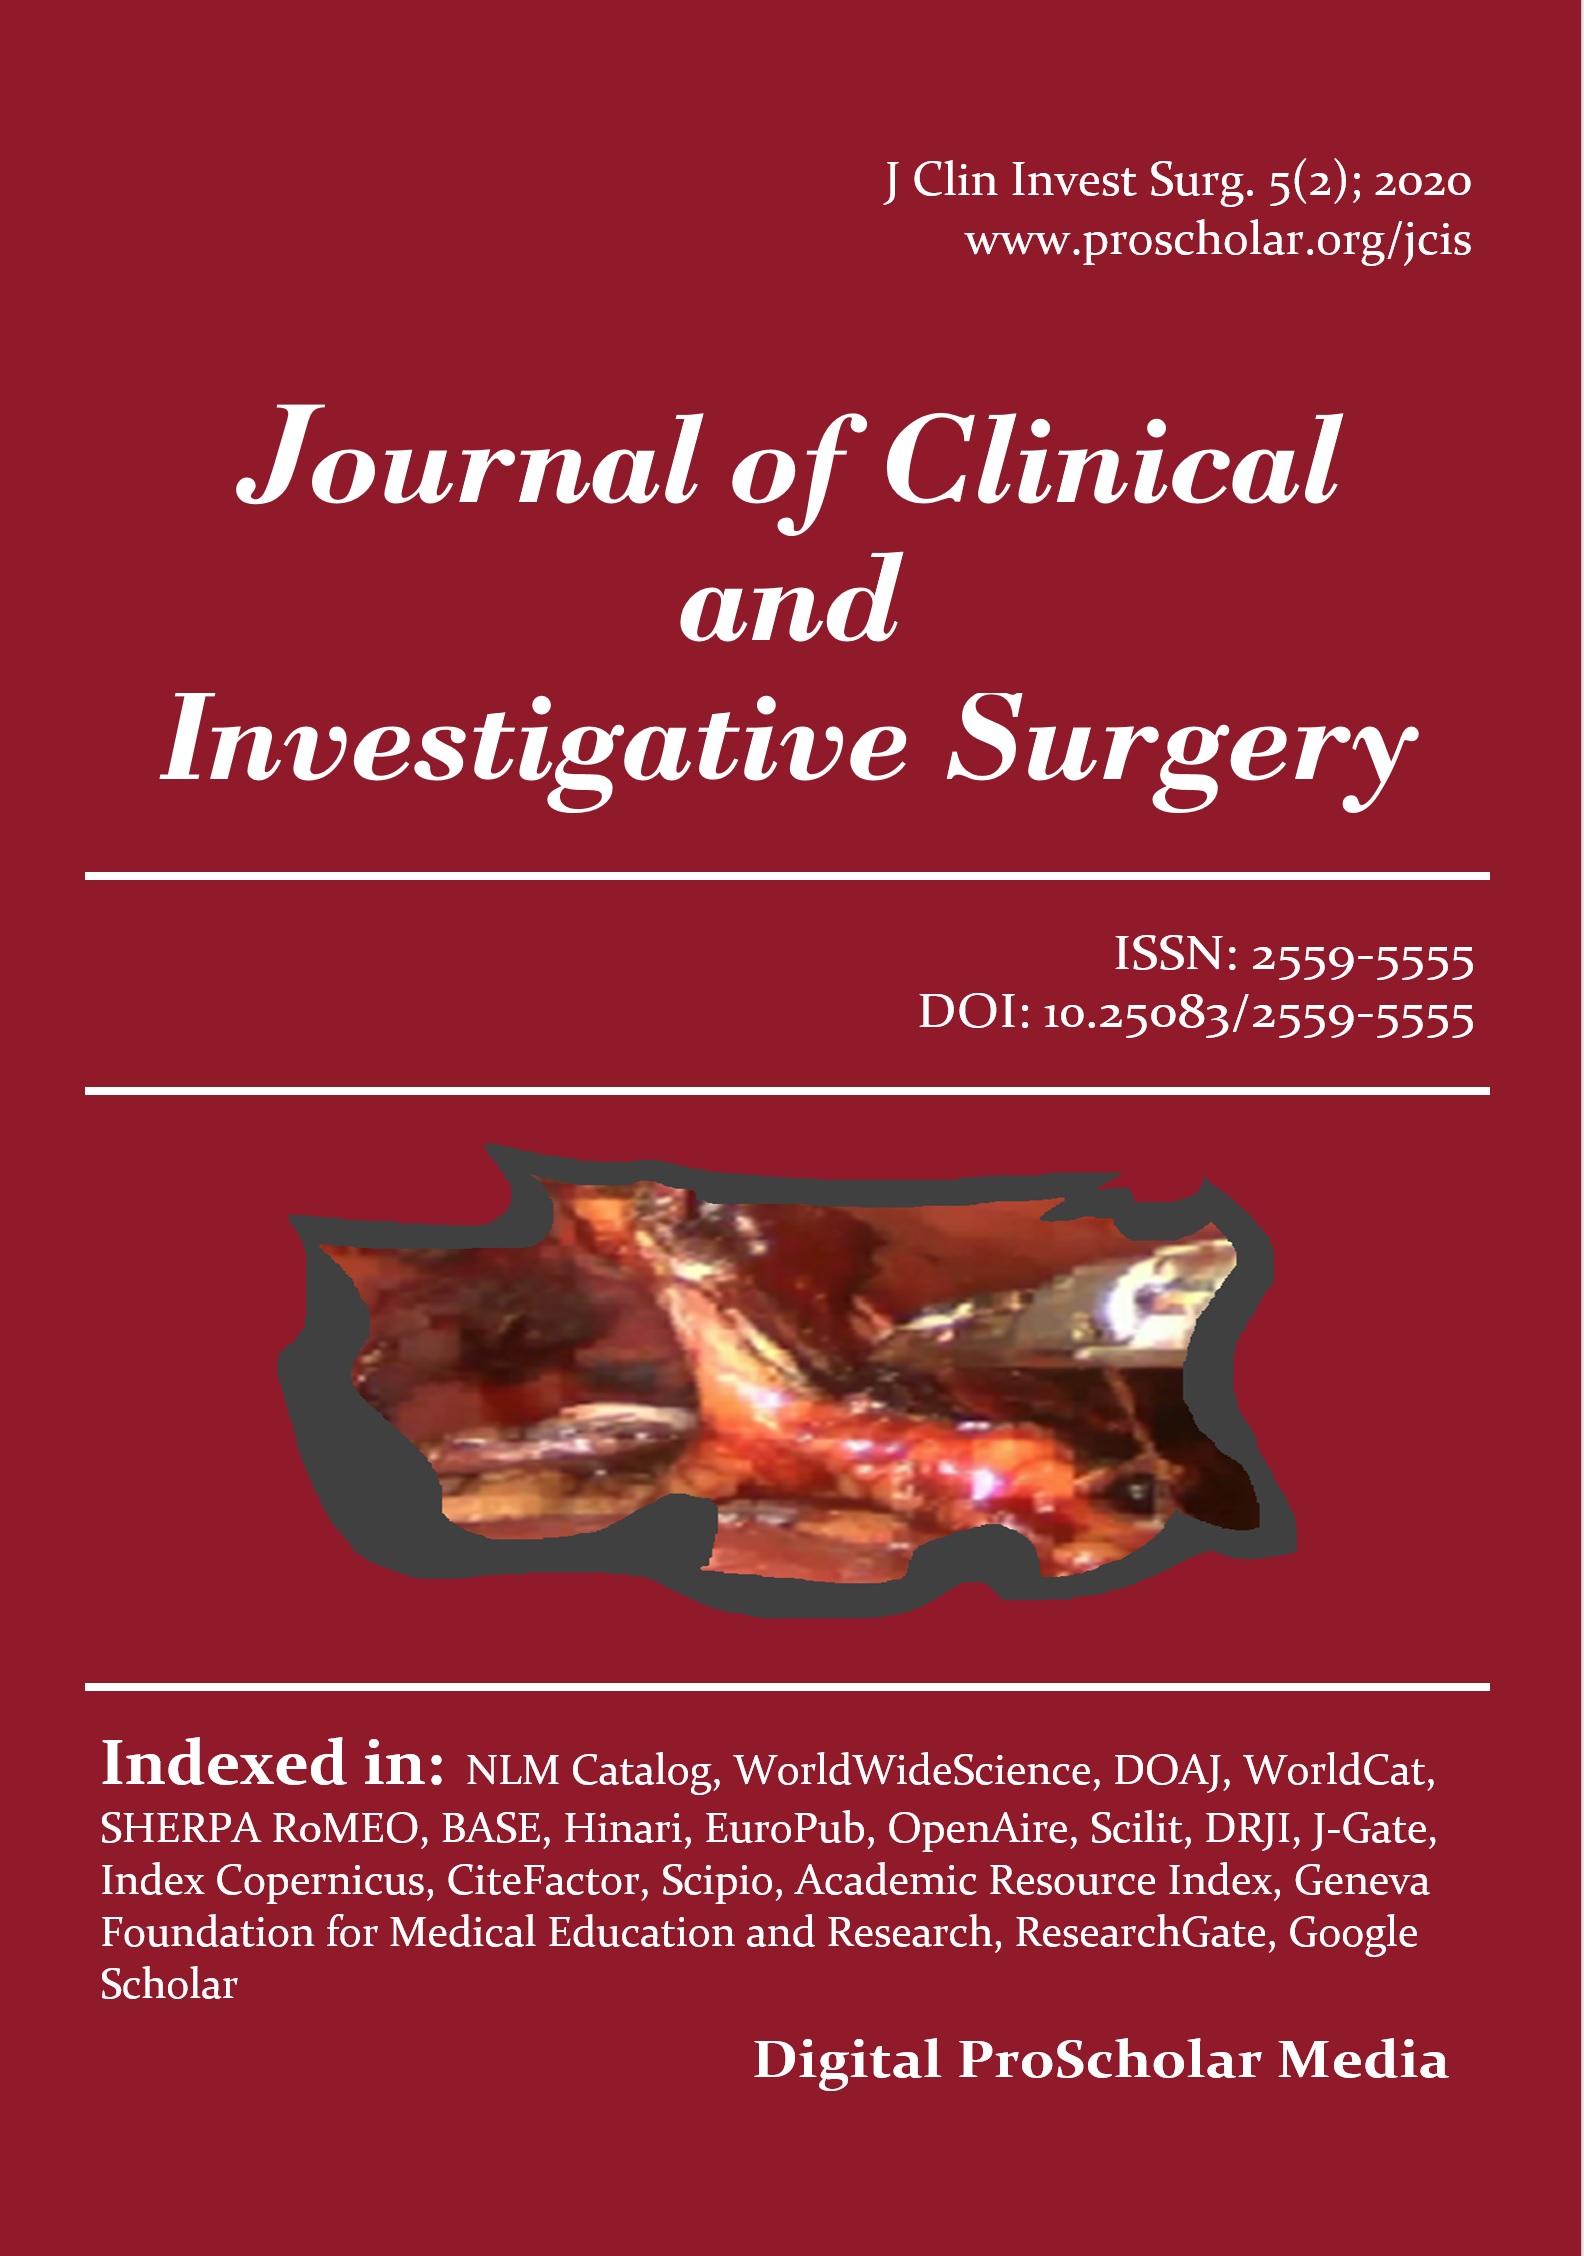 Journal of Clinical and Investigative Surgery